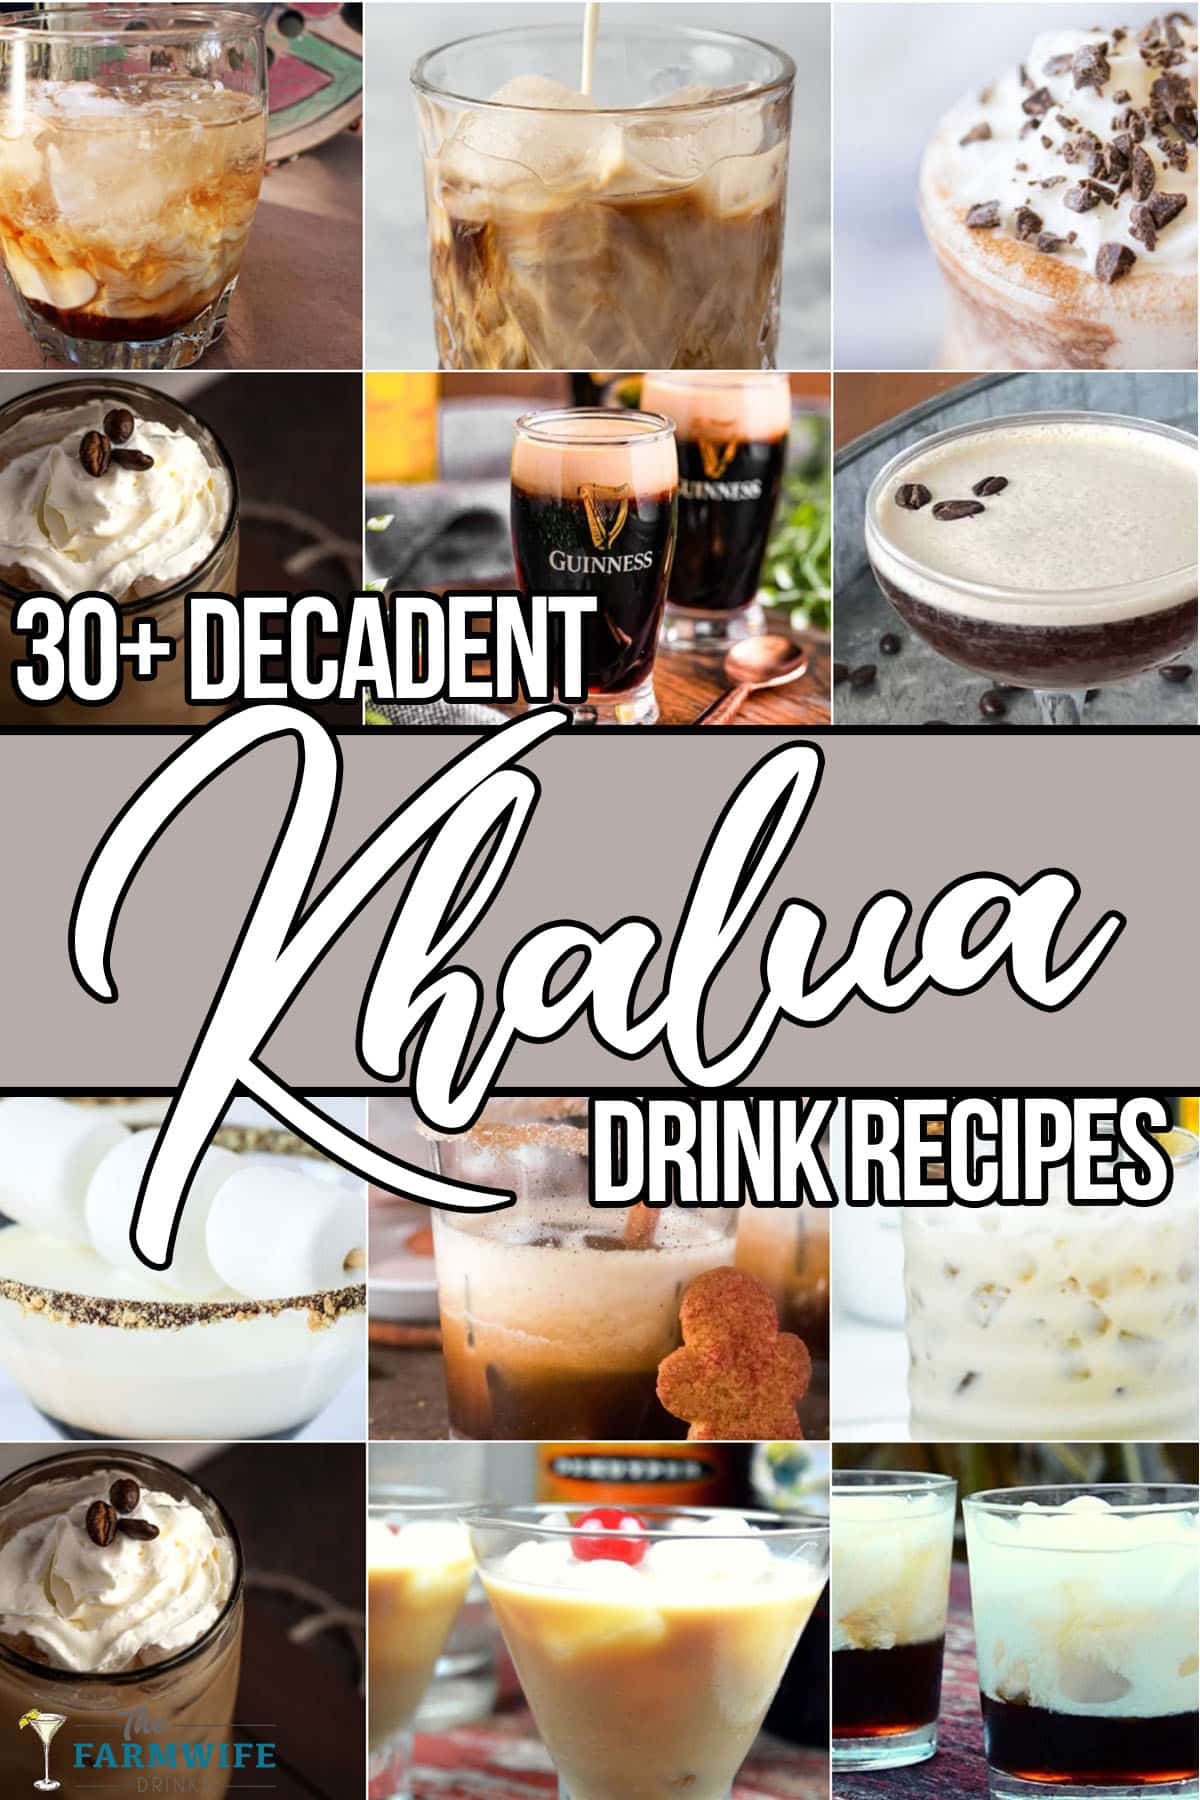 photo collage of drinks using khalua liqueur with text which reads 30+ decadent khalua drink recipes